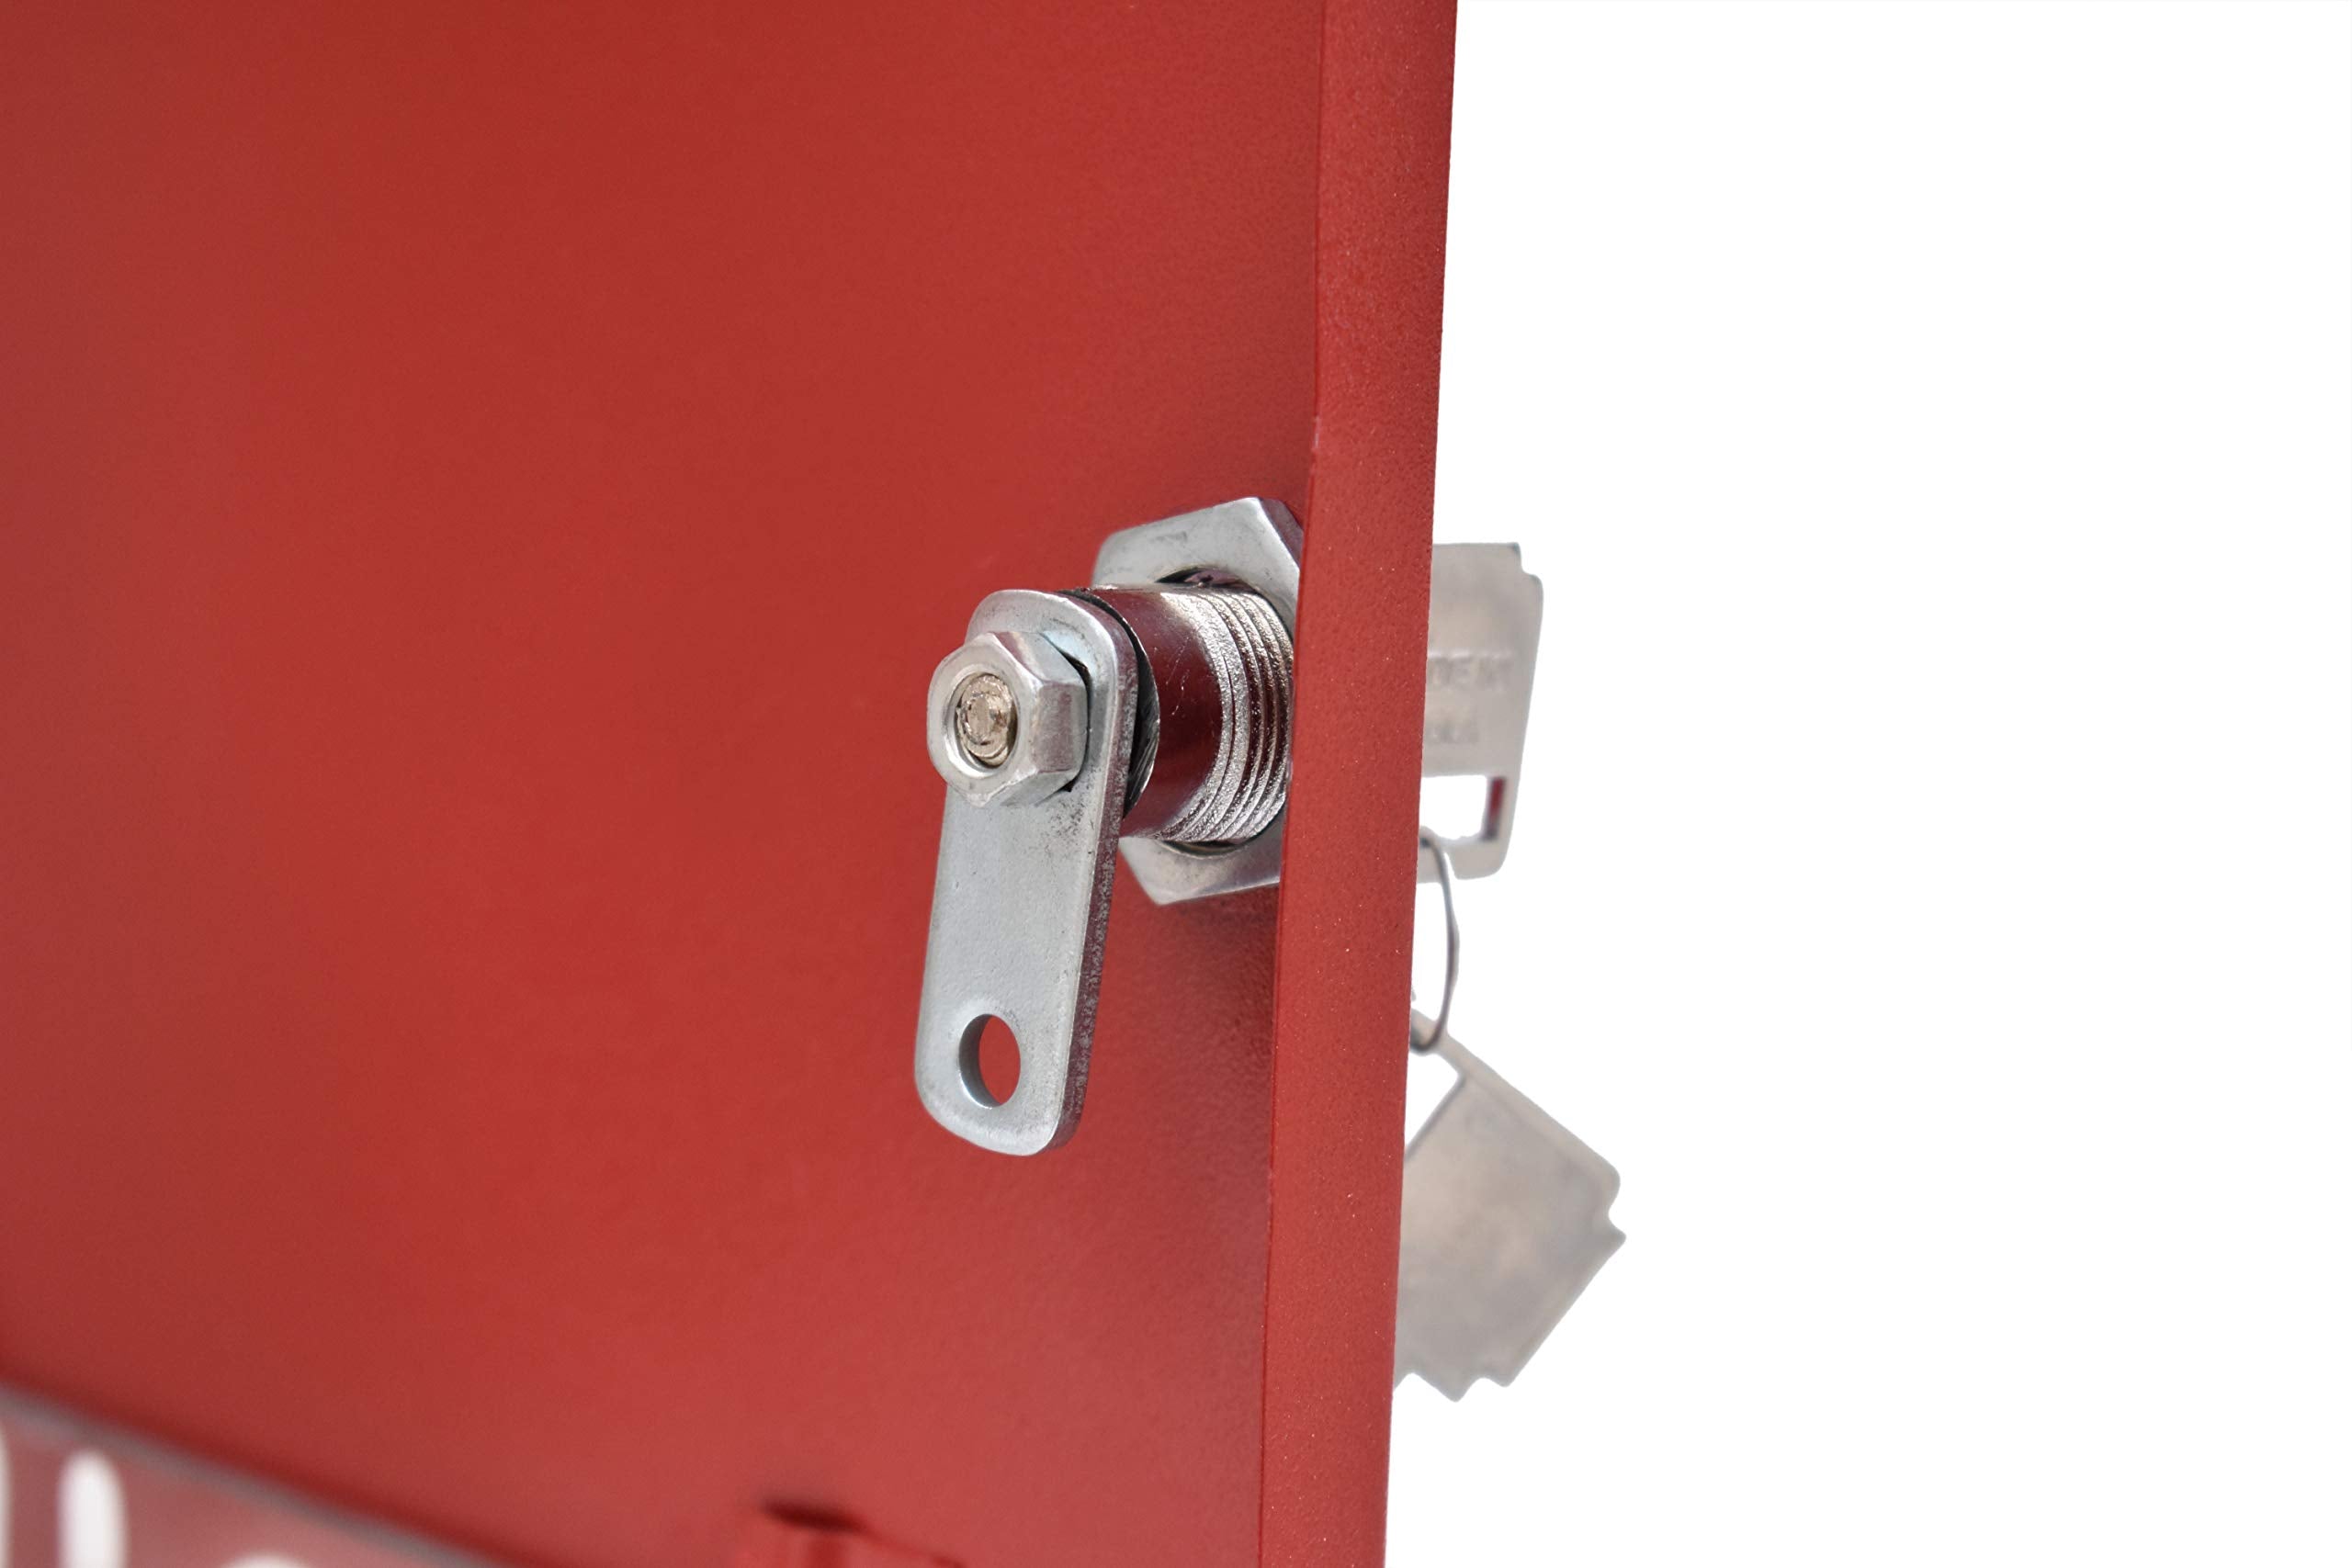 Plantex Big Size Letter Box for Home /Mail Box/Letter Box for gate and Wall with Key Lock (Red & Ivory)